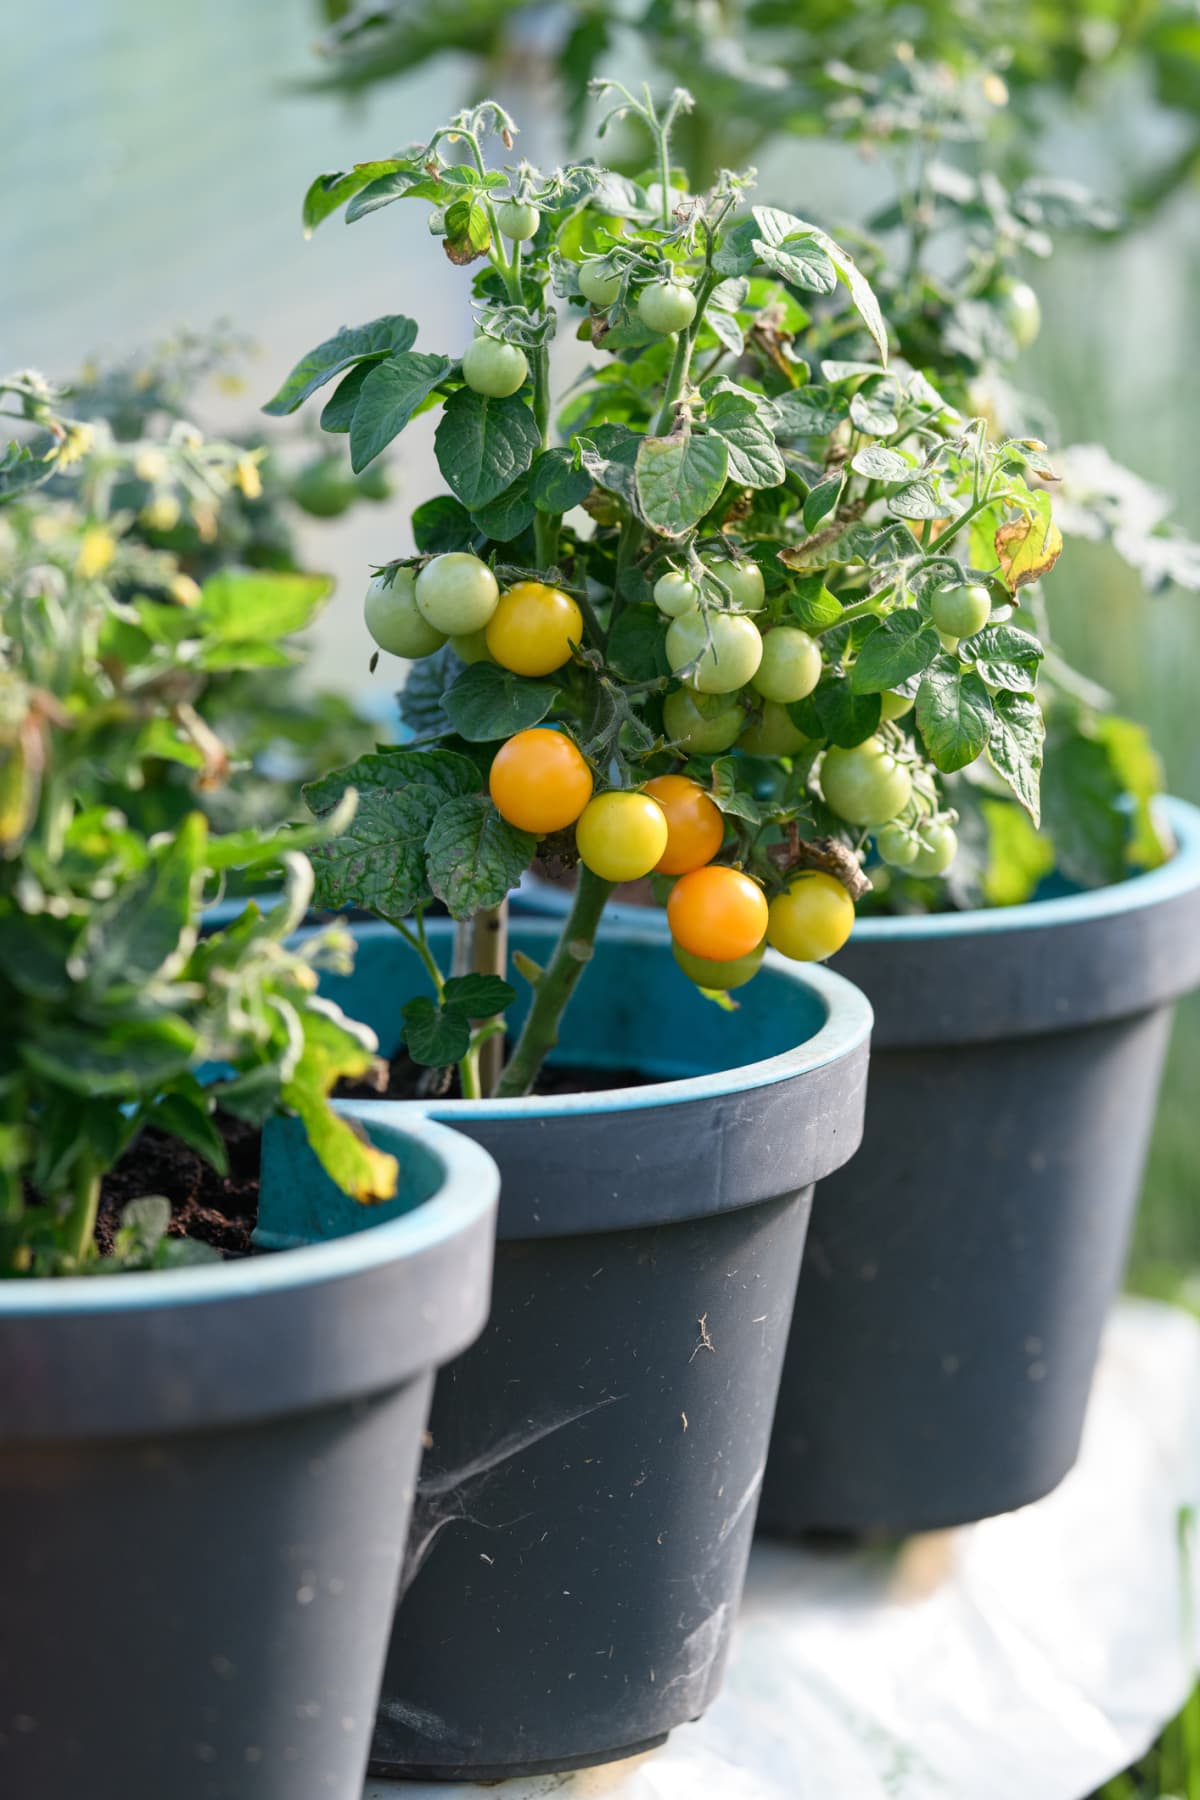 Potted tomato plants with fruits in the ripening process